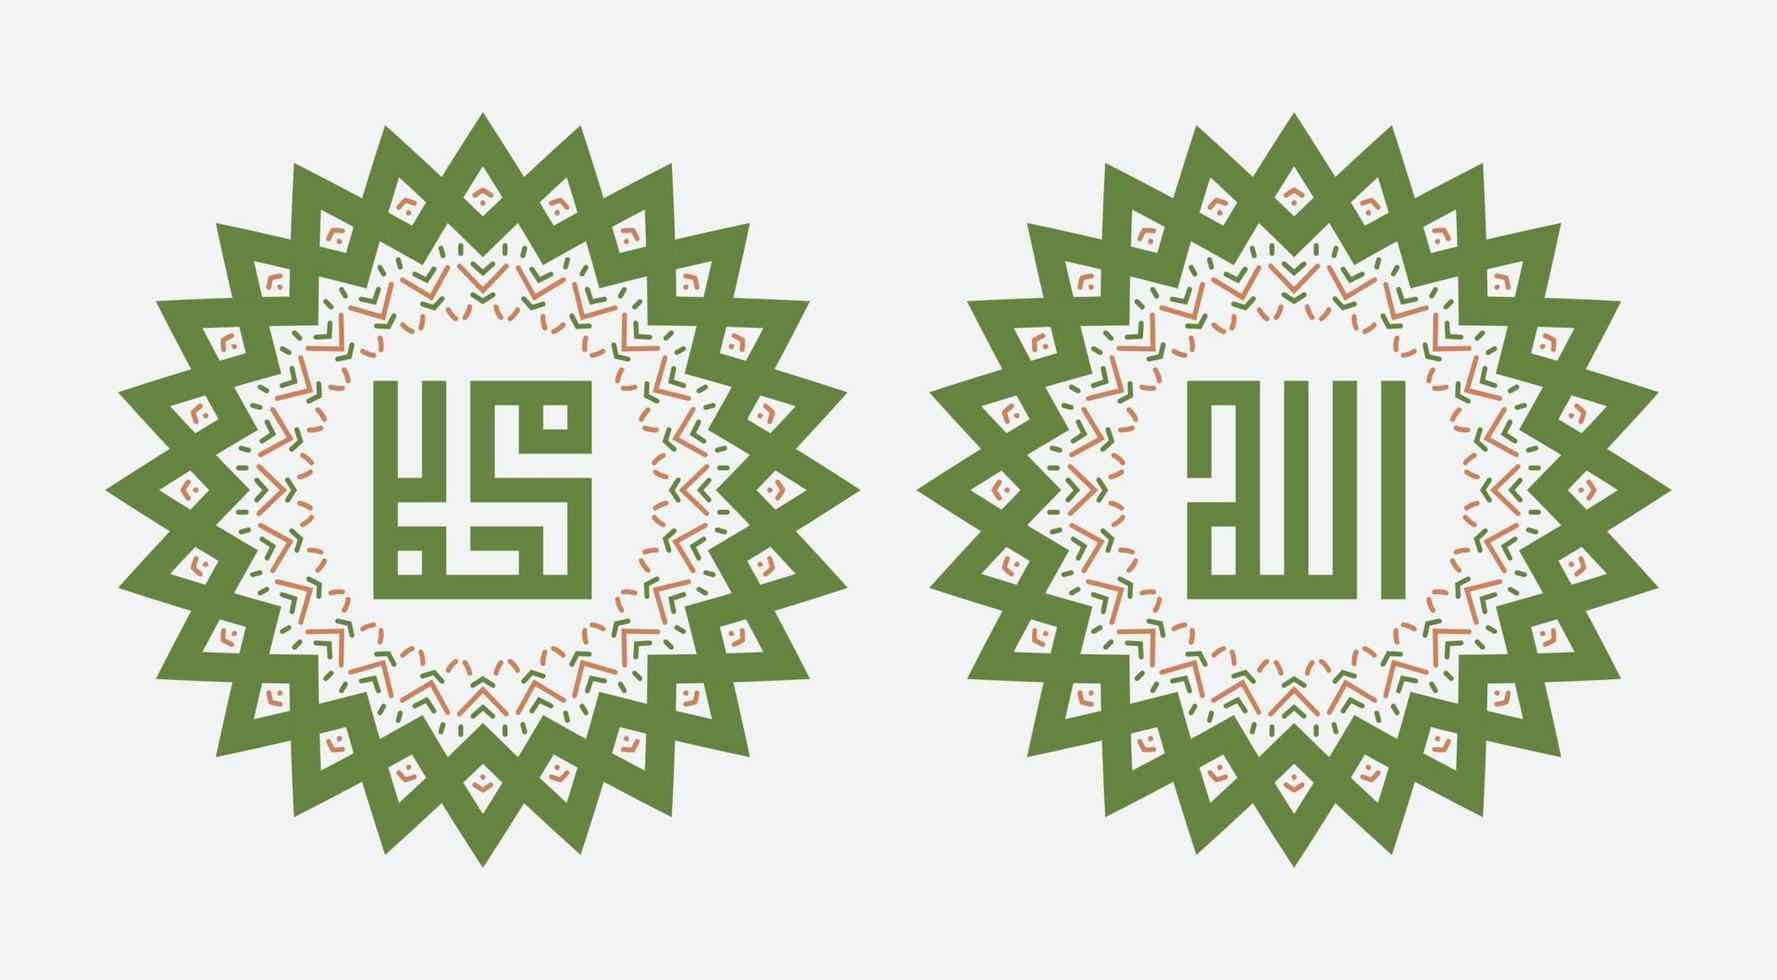 Calligraphy of Allah and Prophet Muhammad. ornament on white background vector